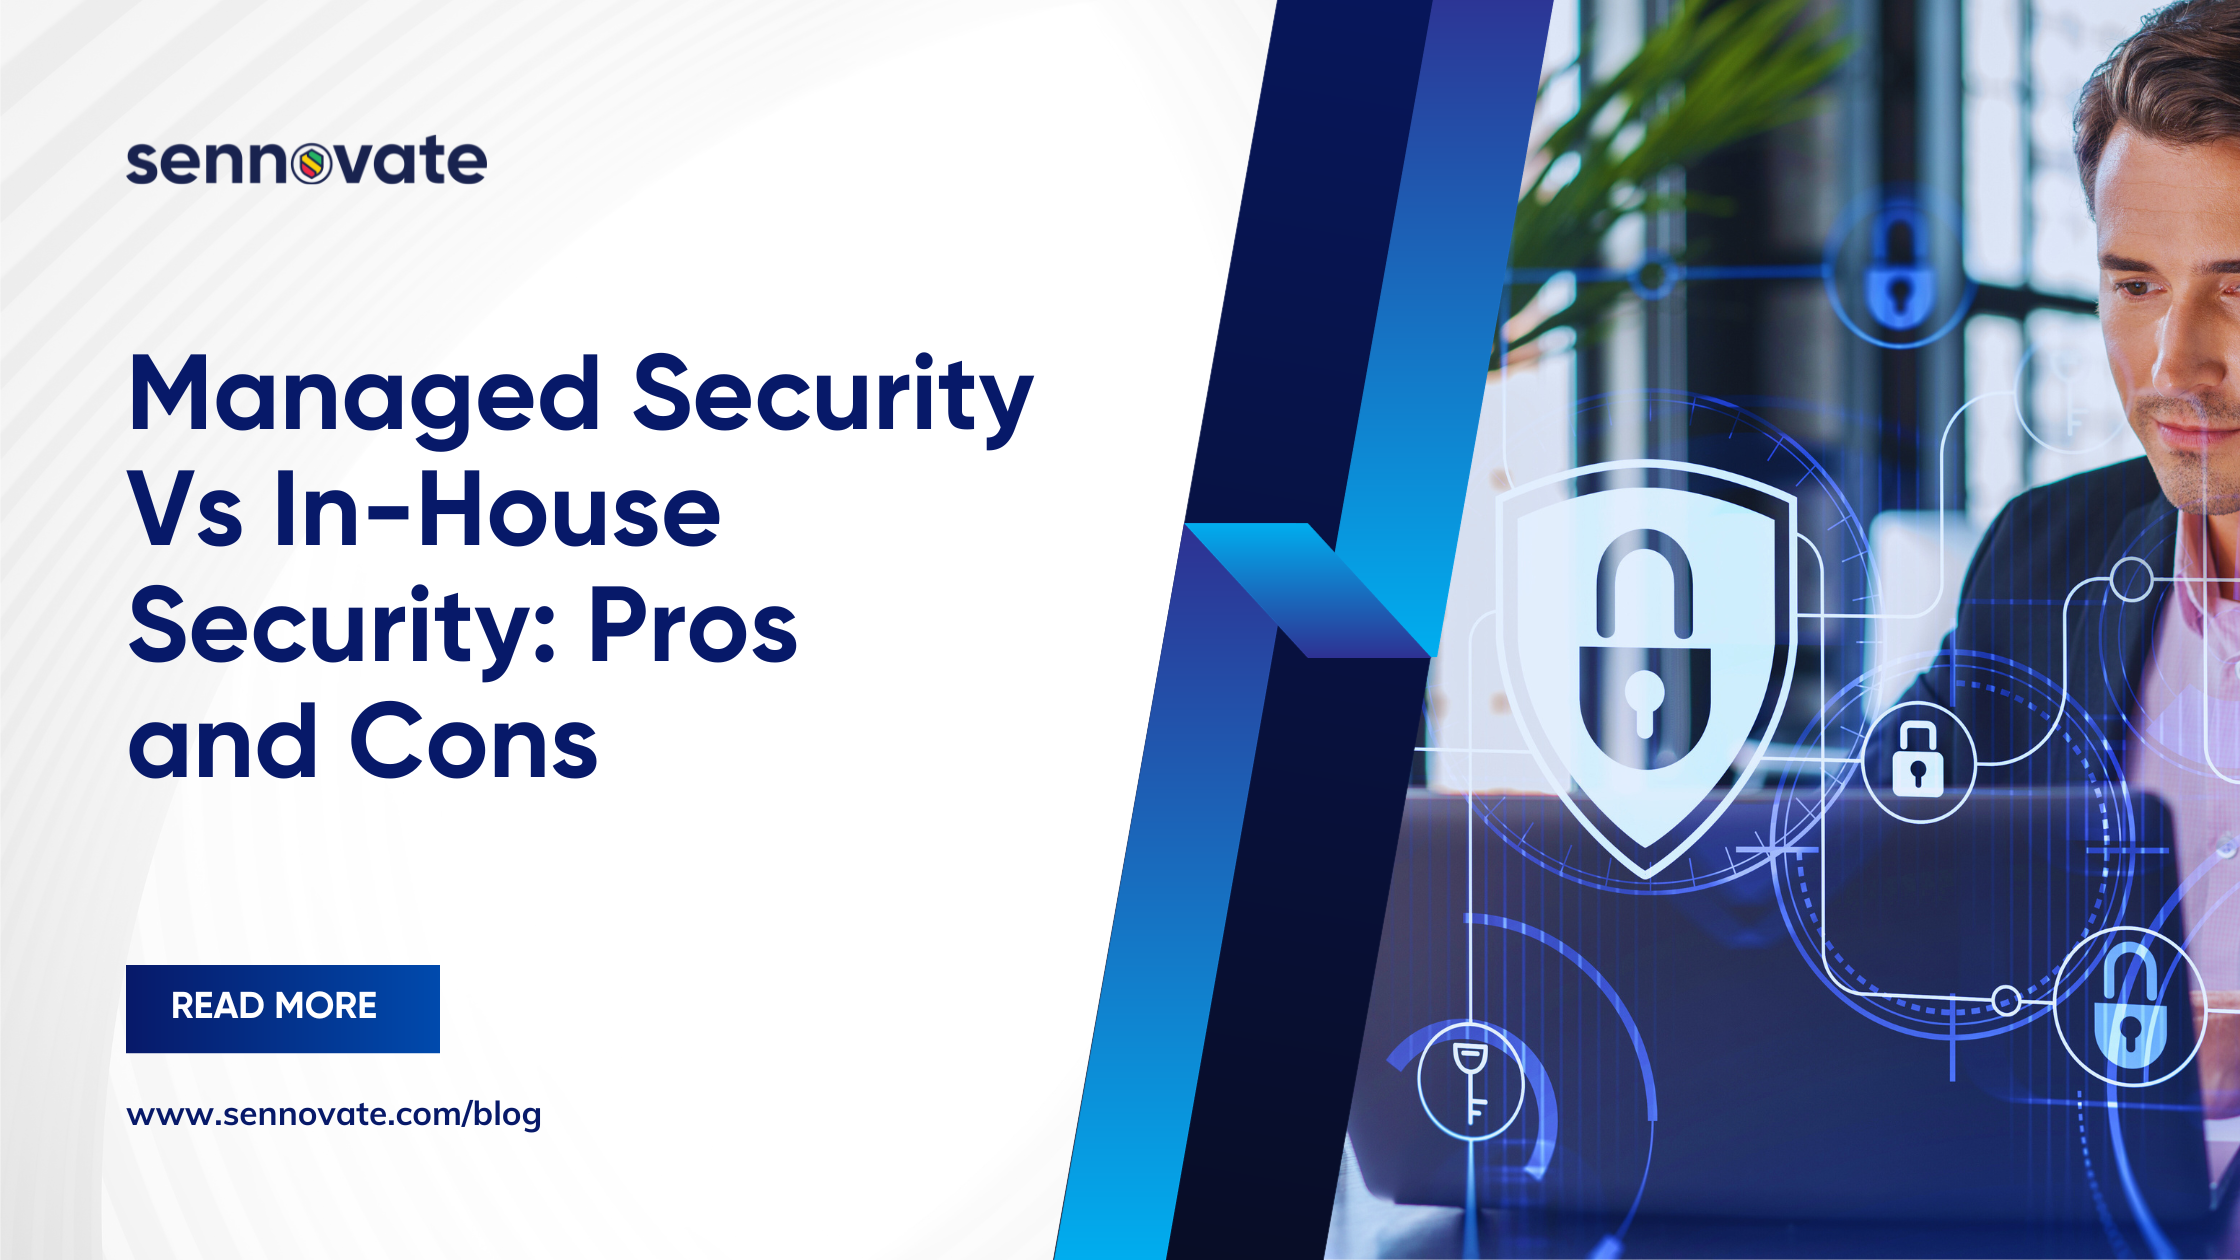 Managed Security Vs In-house Security: Pros and Cons